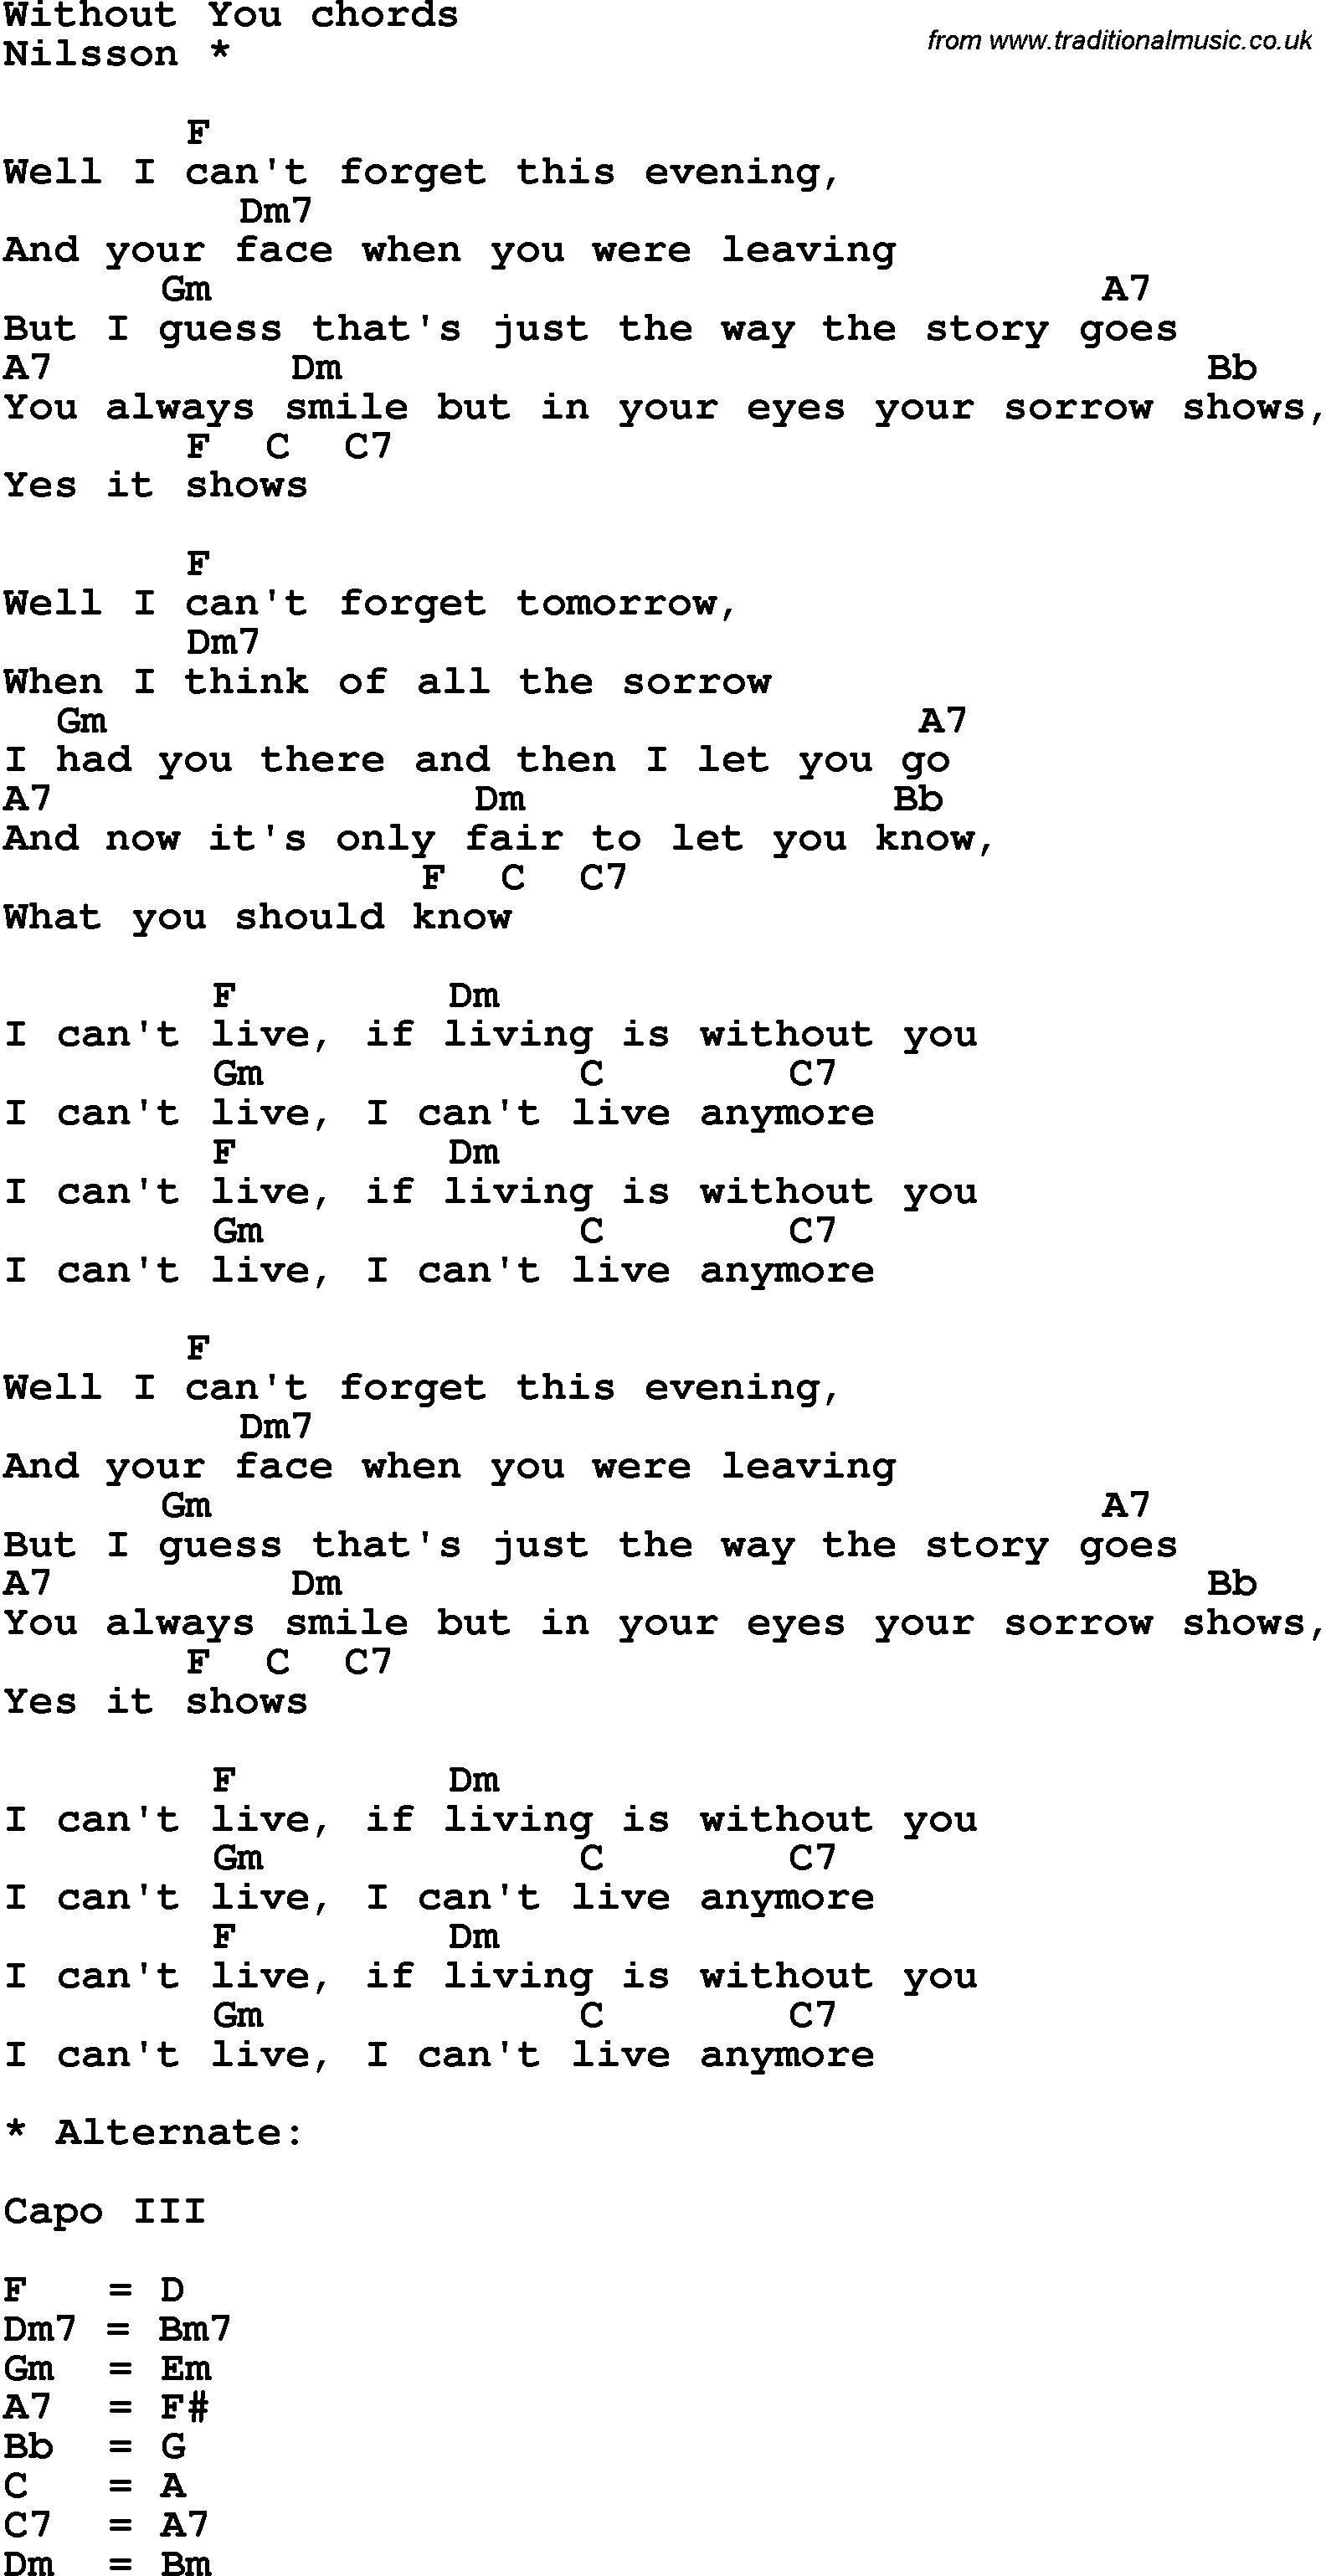 Song Lyrics with guitar chords for Without You